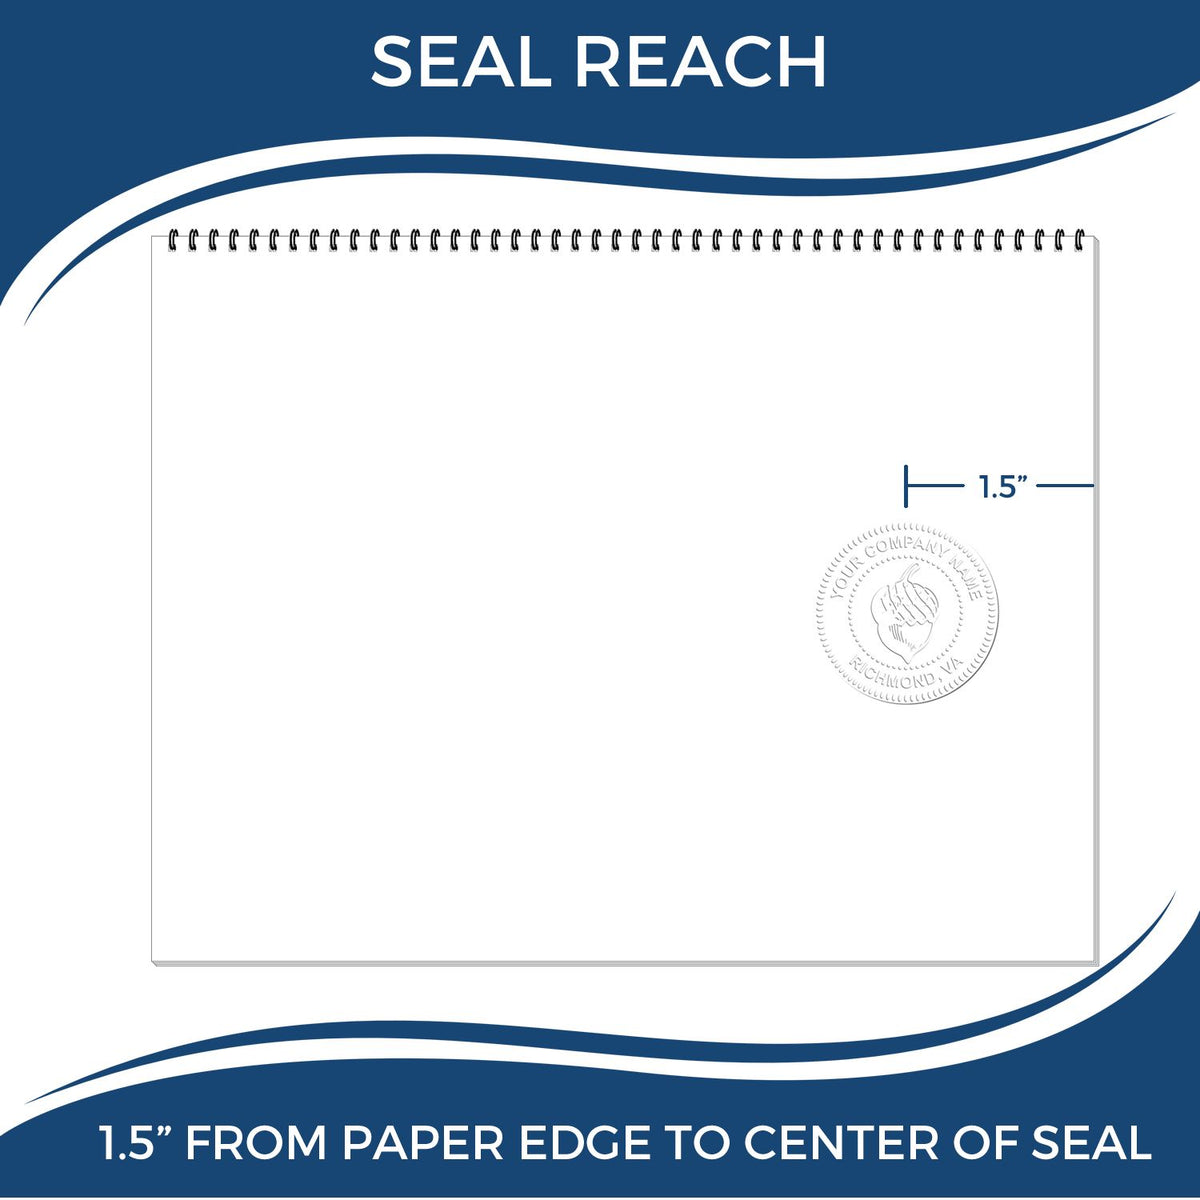 An infographic showing the seal reach which is represented by a ruler and a miniature seal image of the Hybrid Iowa Landscape Architect Seal